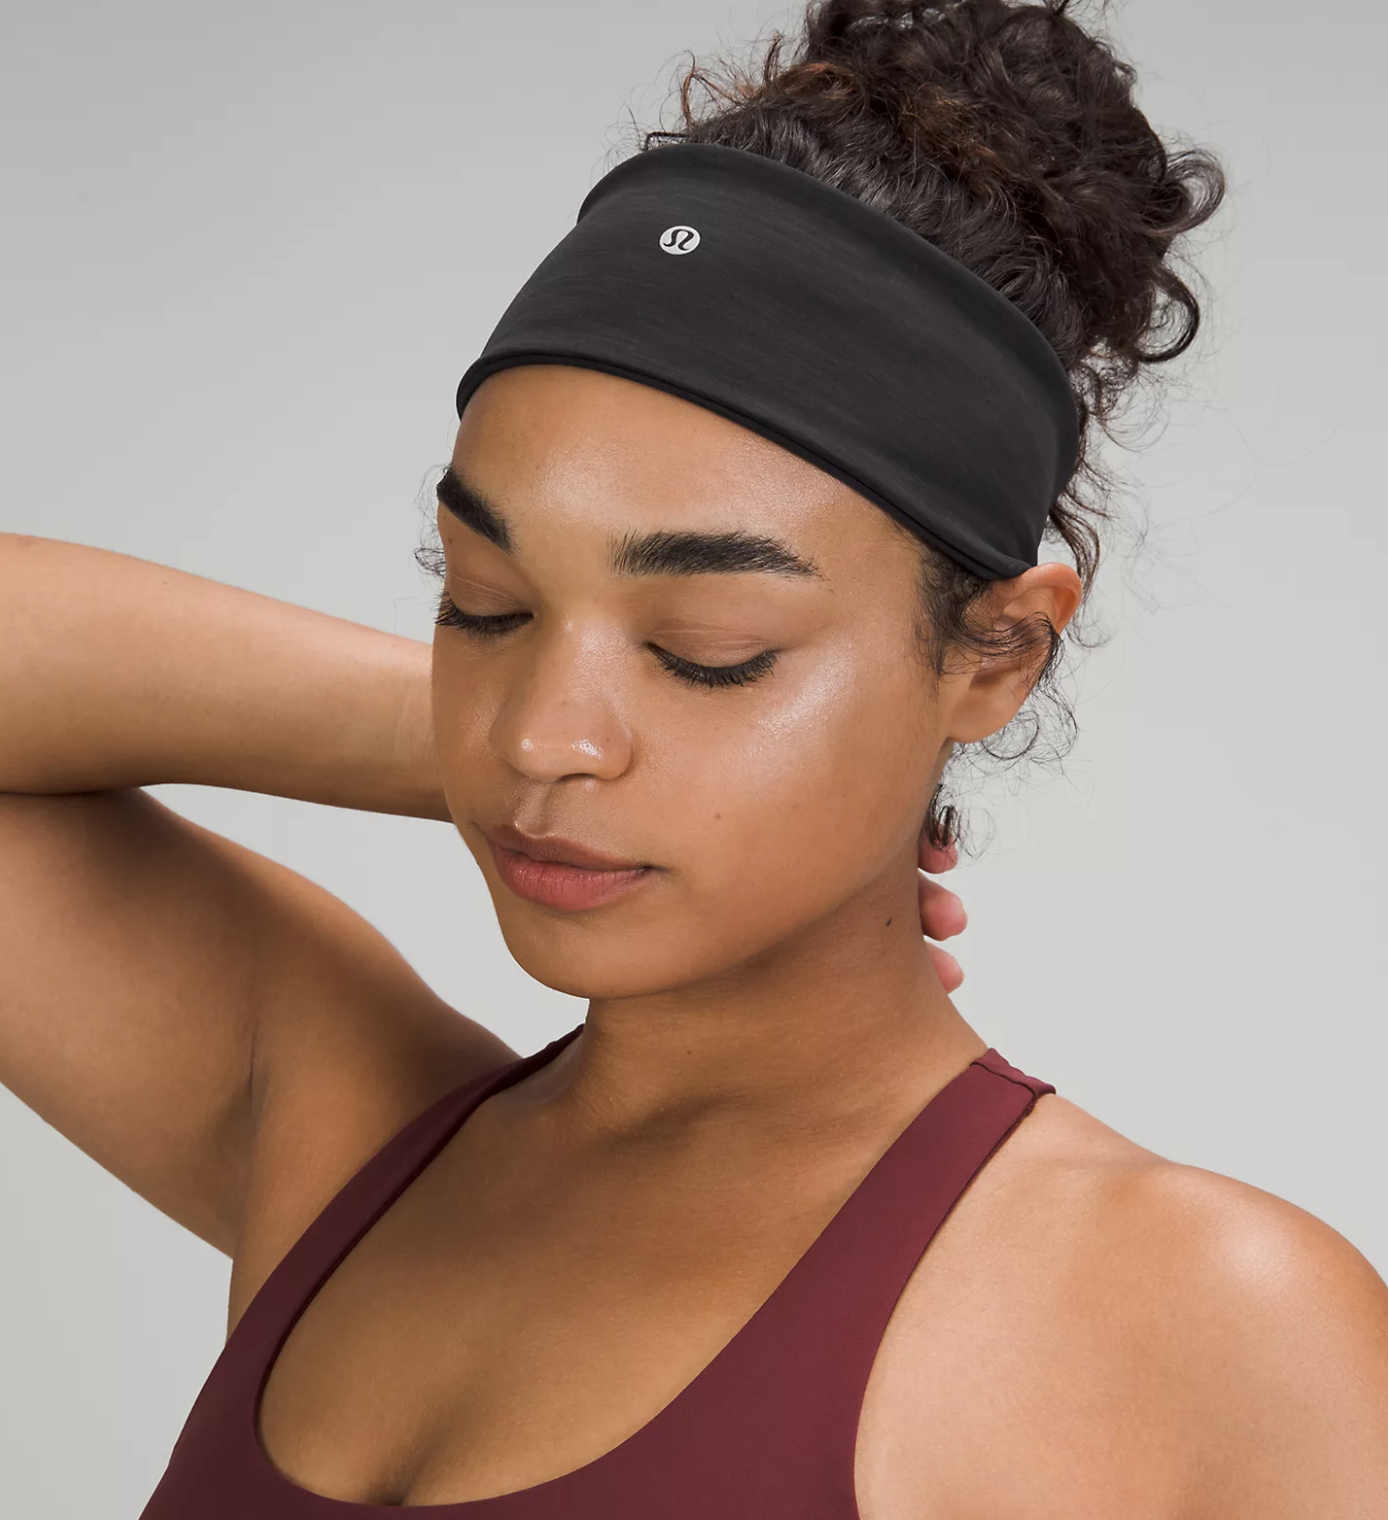 A person wearing a sports bra and a headband